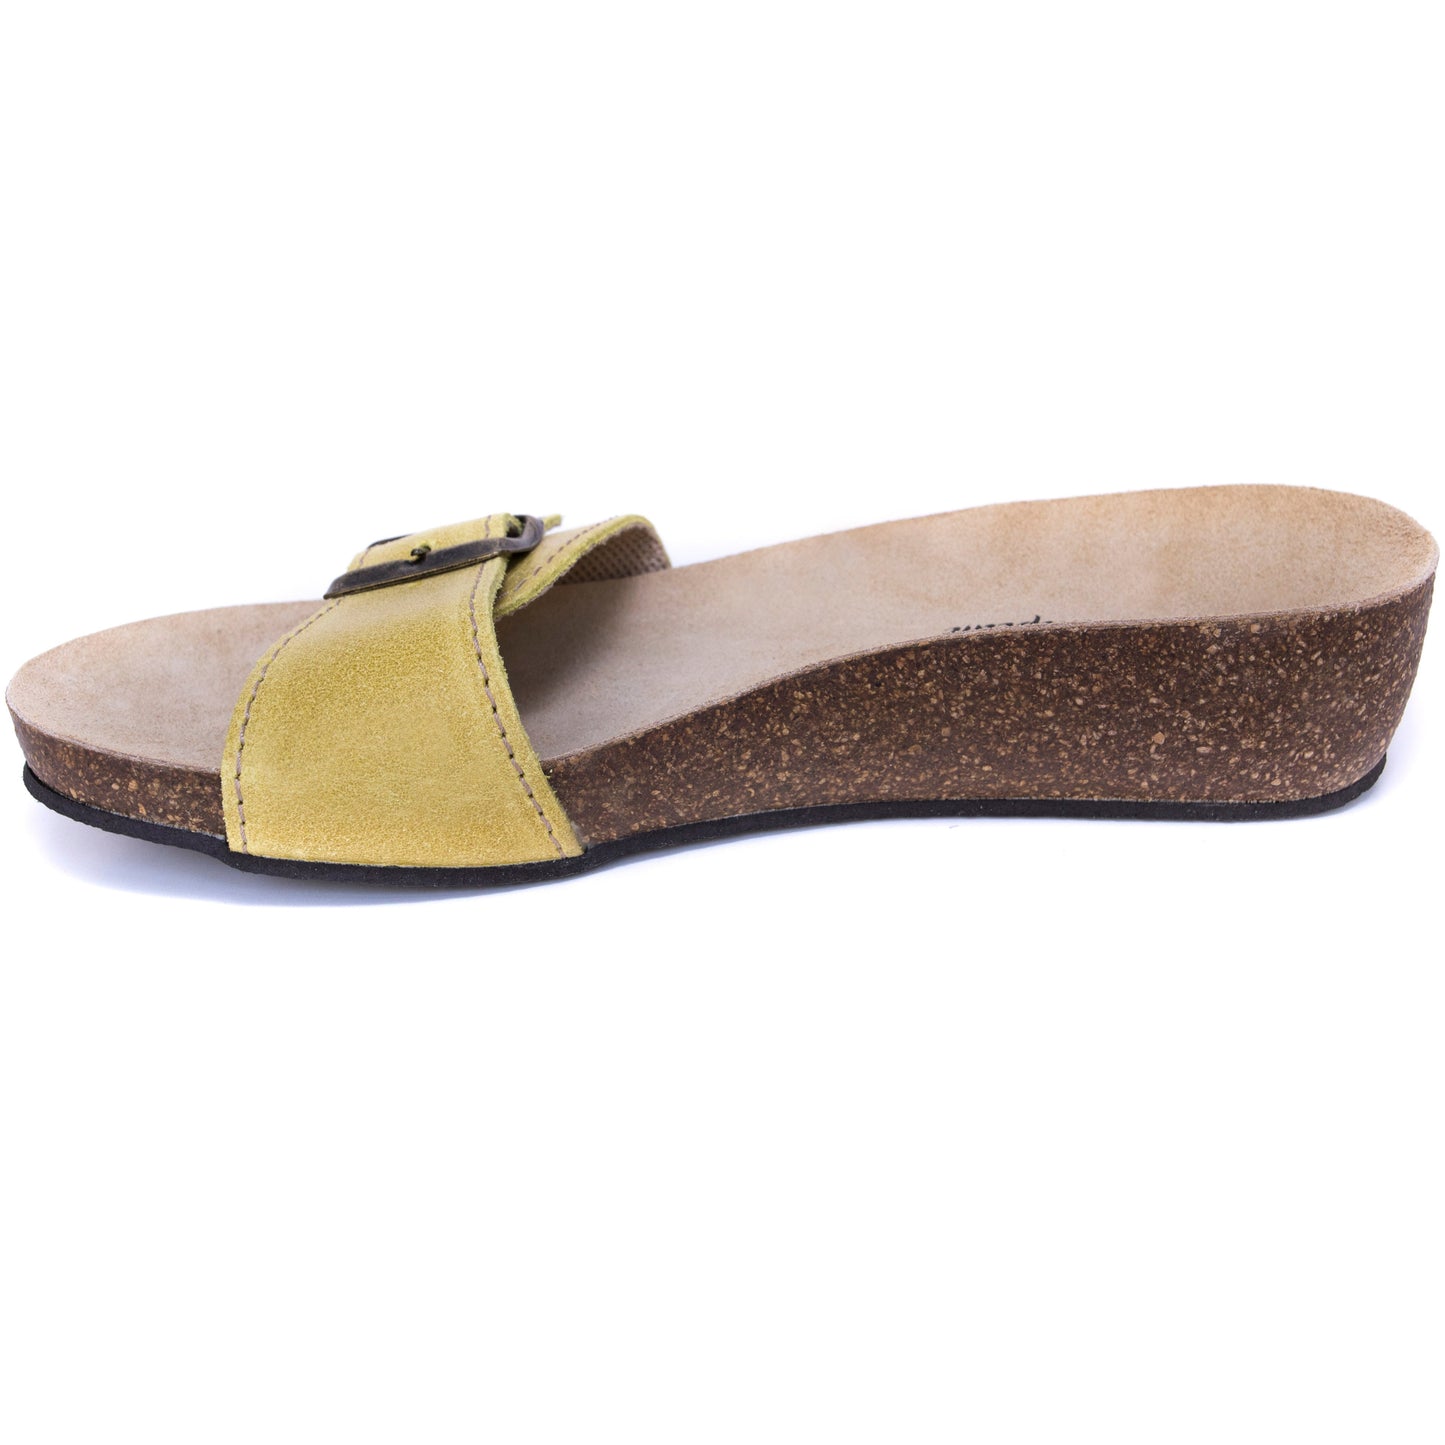 T84: color 70 - yellow ladies orthotic wedge sandals